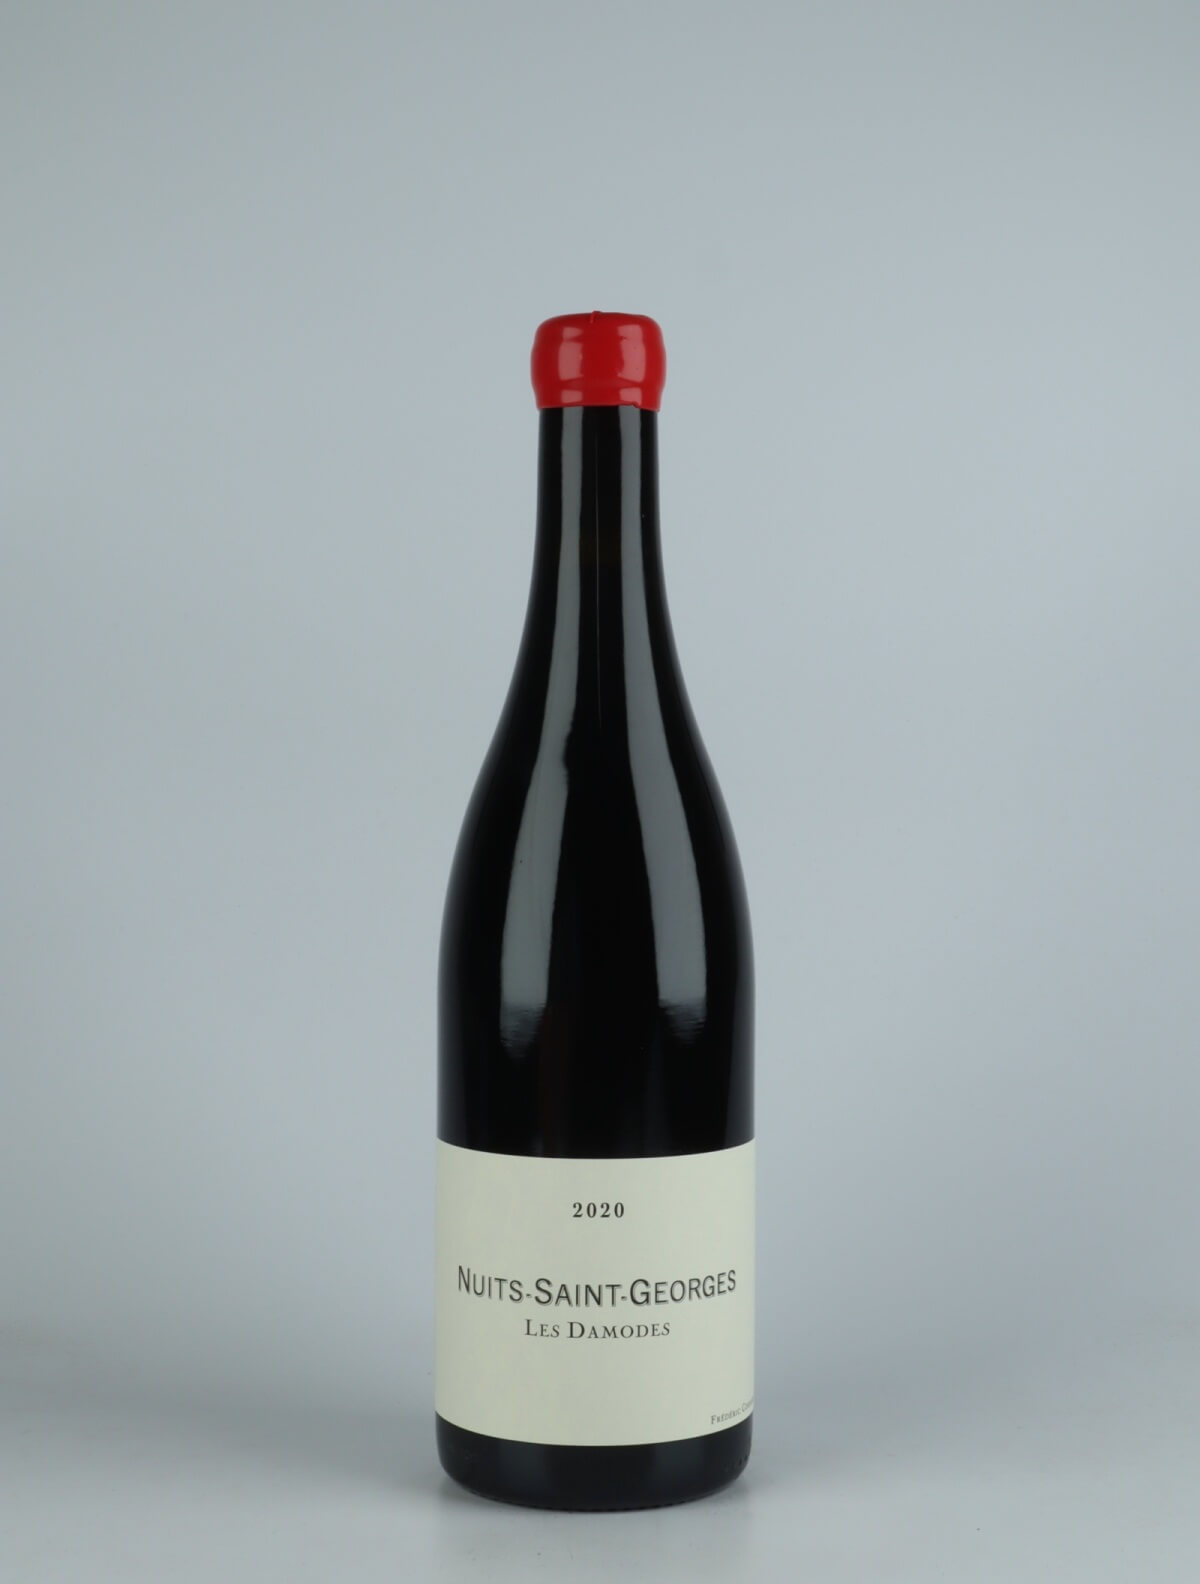 A bottle 2020 Nuits Saint Georges - Damodes Red wine from Frédéric Cossard, Burgundy in France